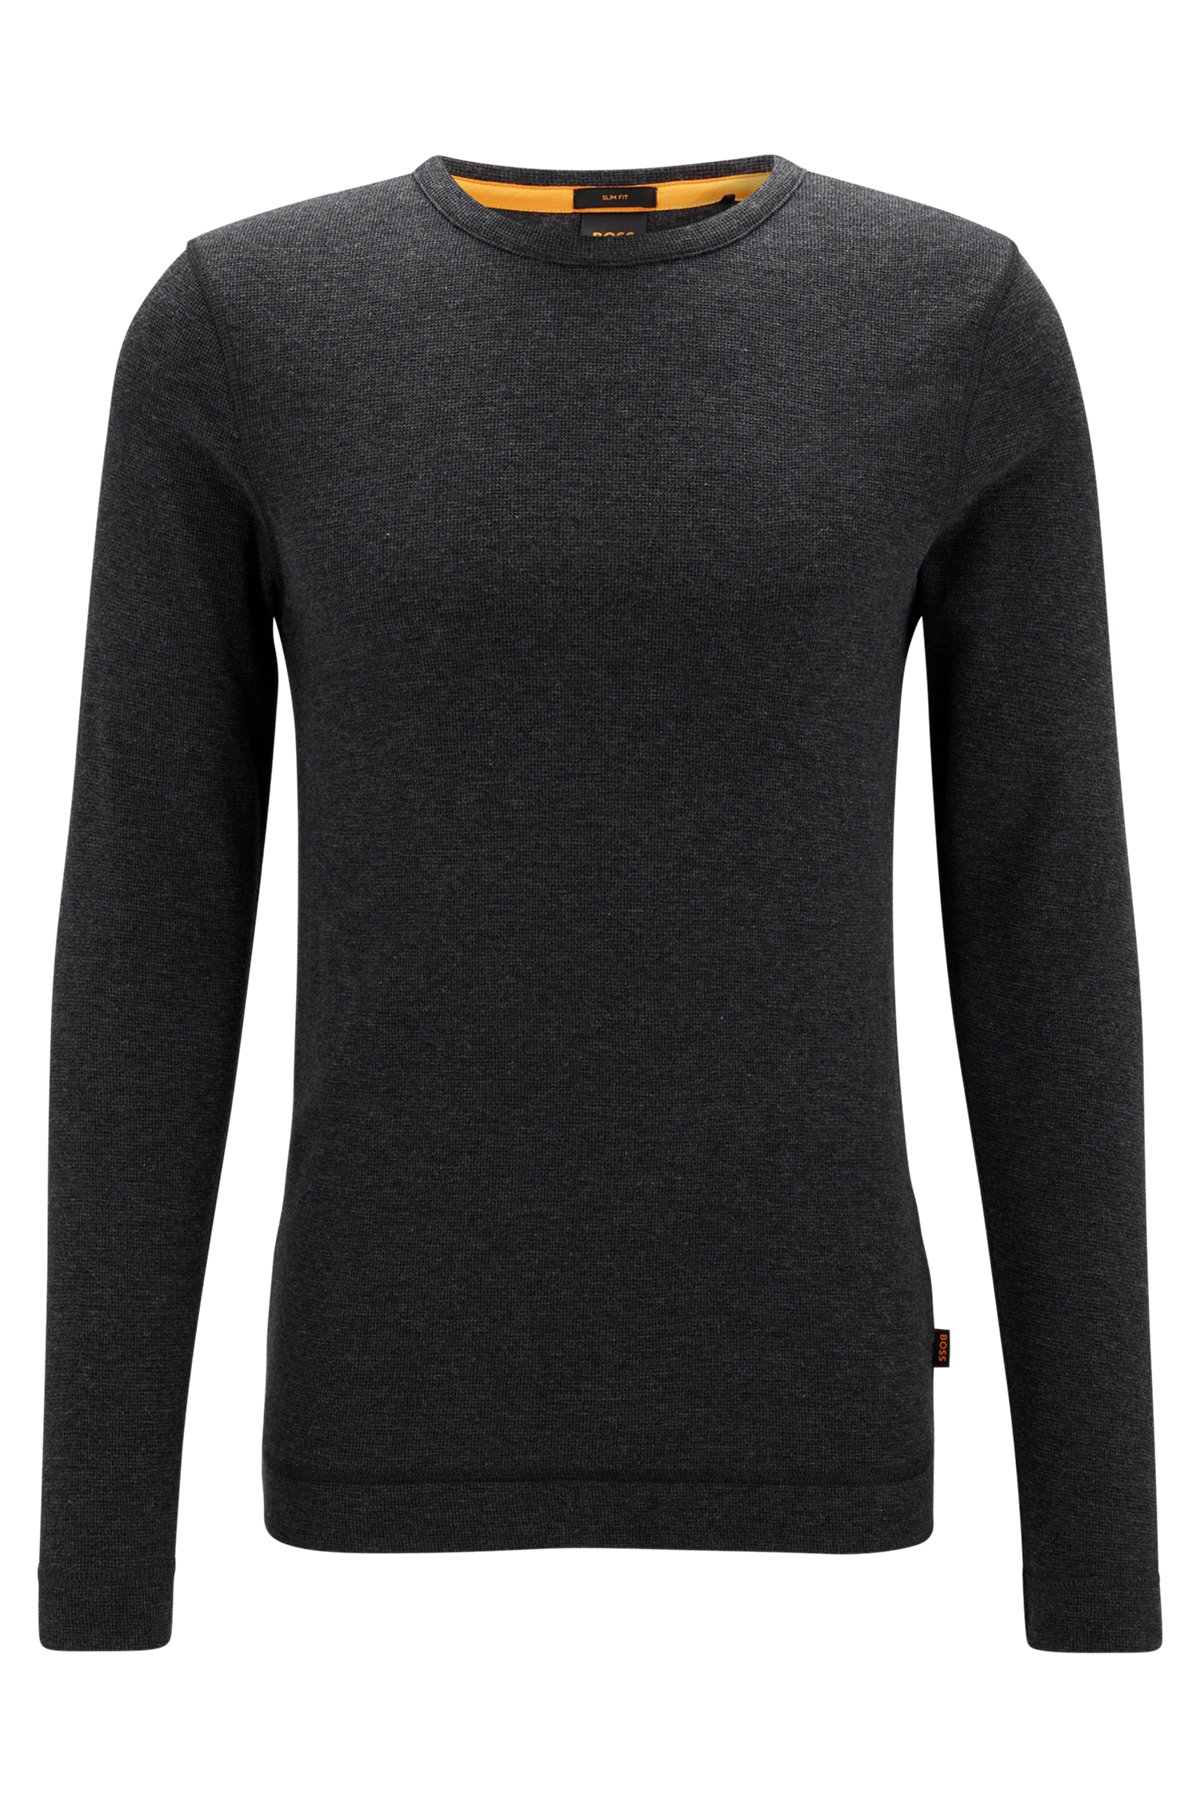 Slim-fit long-sleeved T-shirt in waffle cotton, Black